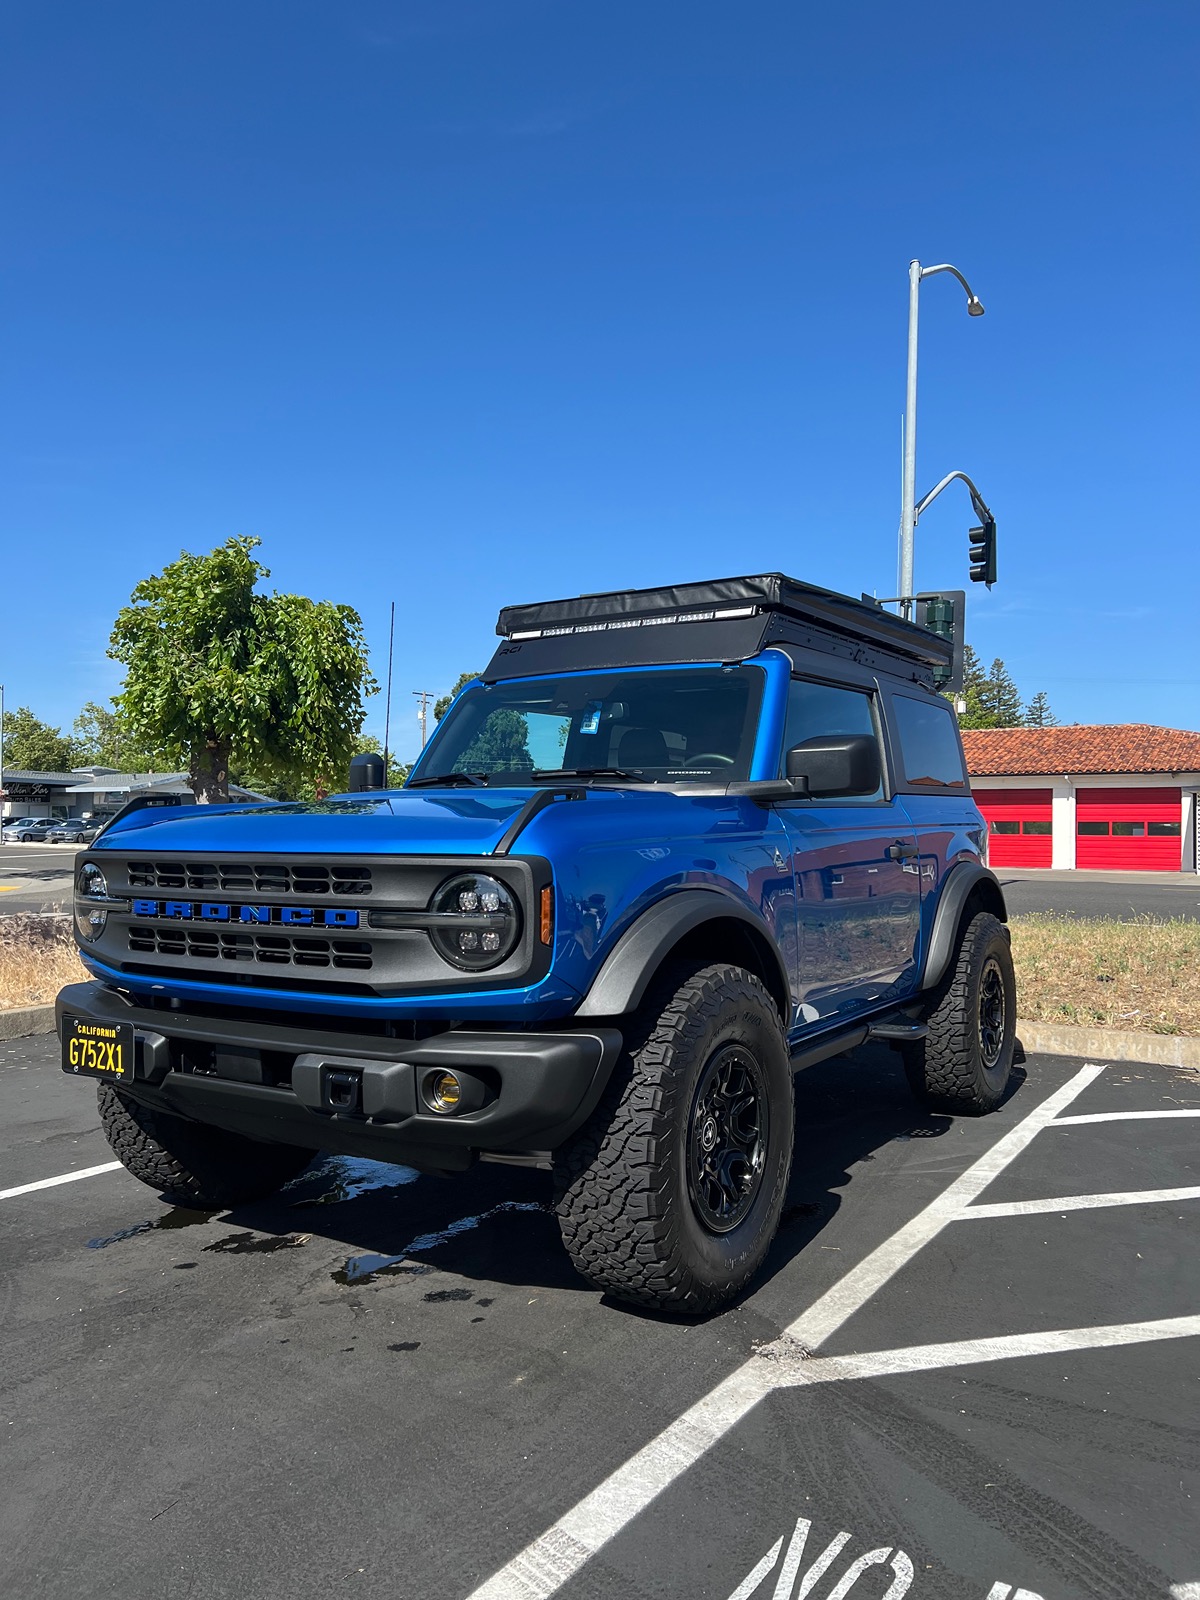 Ford Bronco Disappointing RCI roof rack… IMG_3142